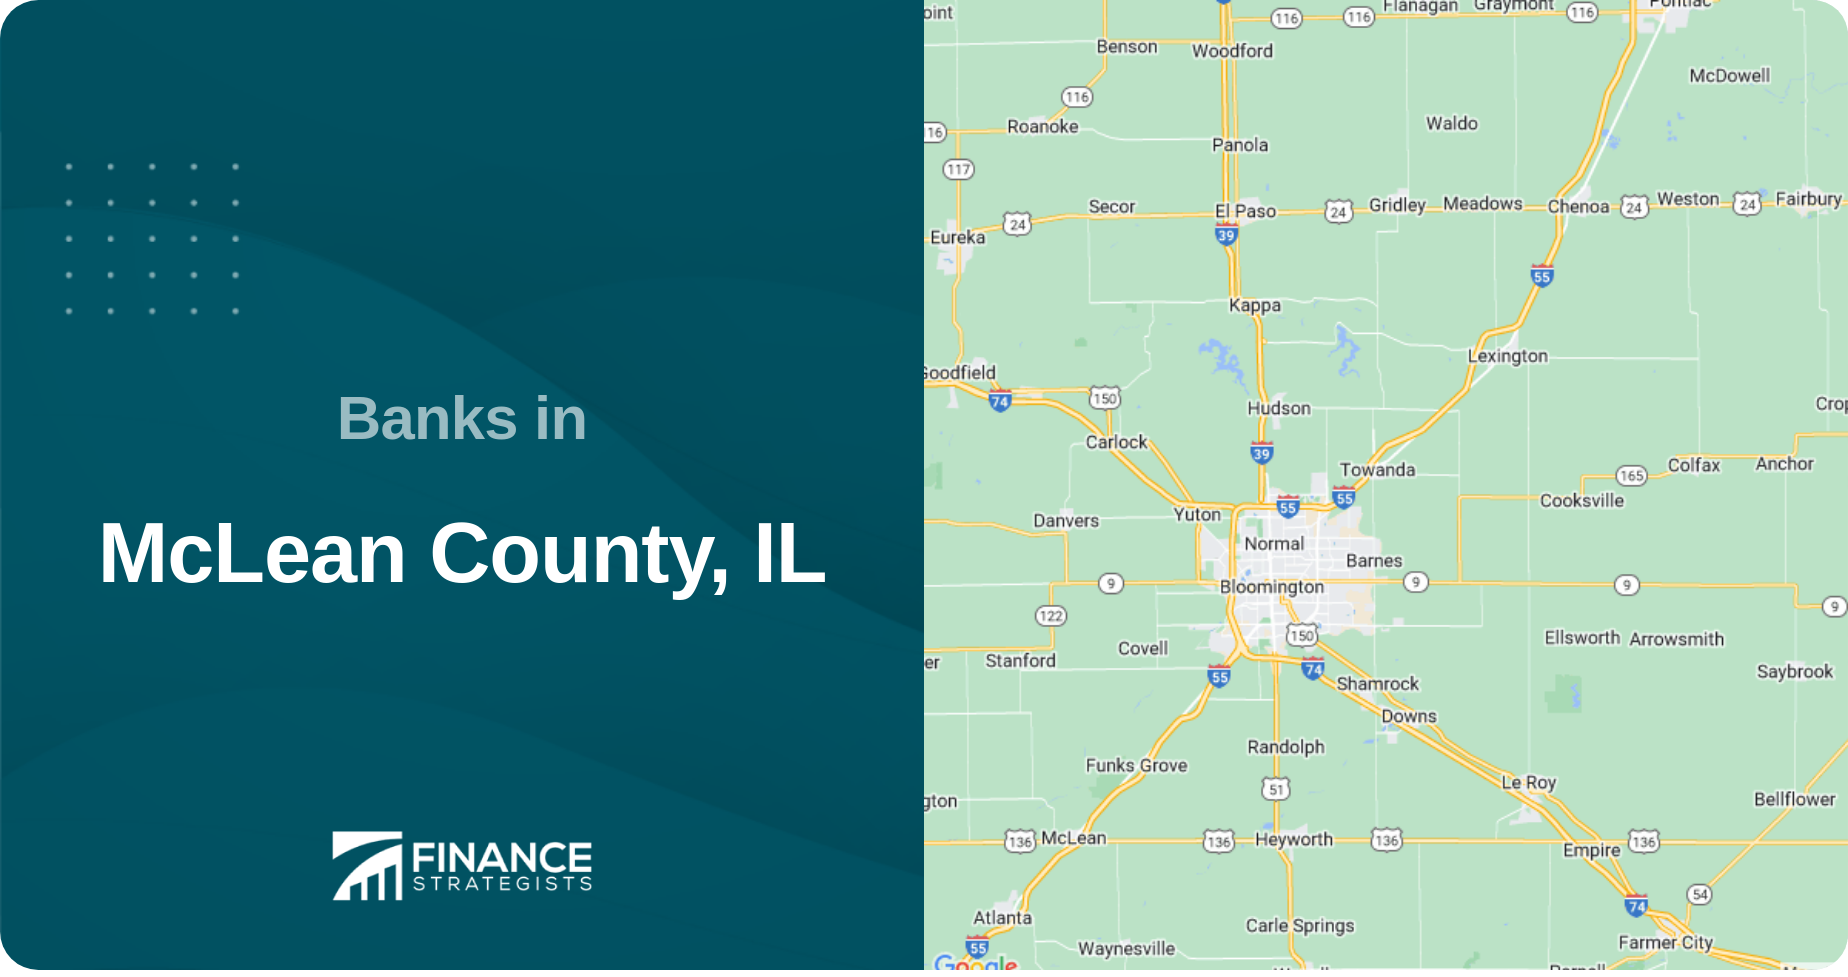 Banks in McLean County, IL